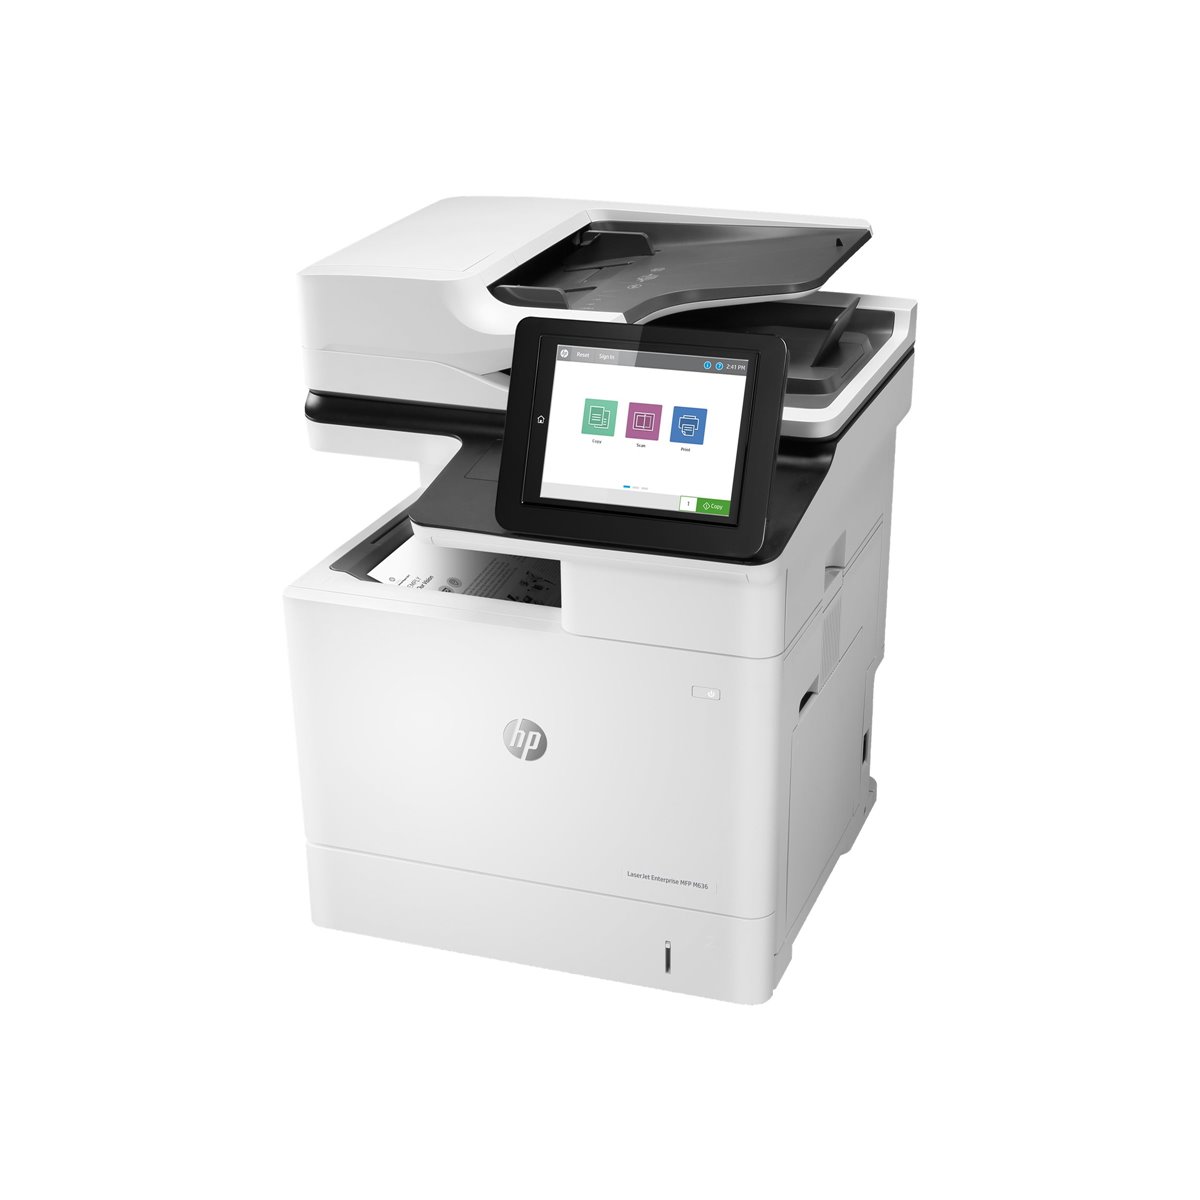 HP LaserJet Enterprise MFP M636fh - Print - copy - scan - fax - Scan to email Two-sided printing 150-sheet ADF Strong Security -